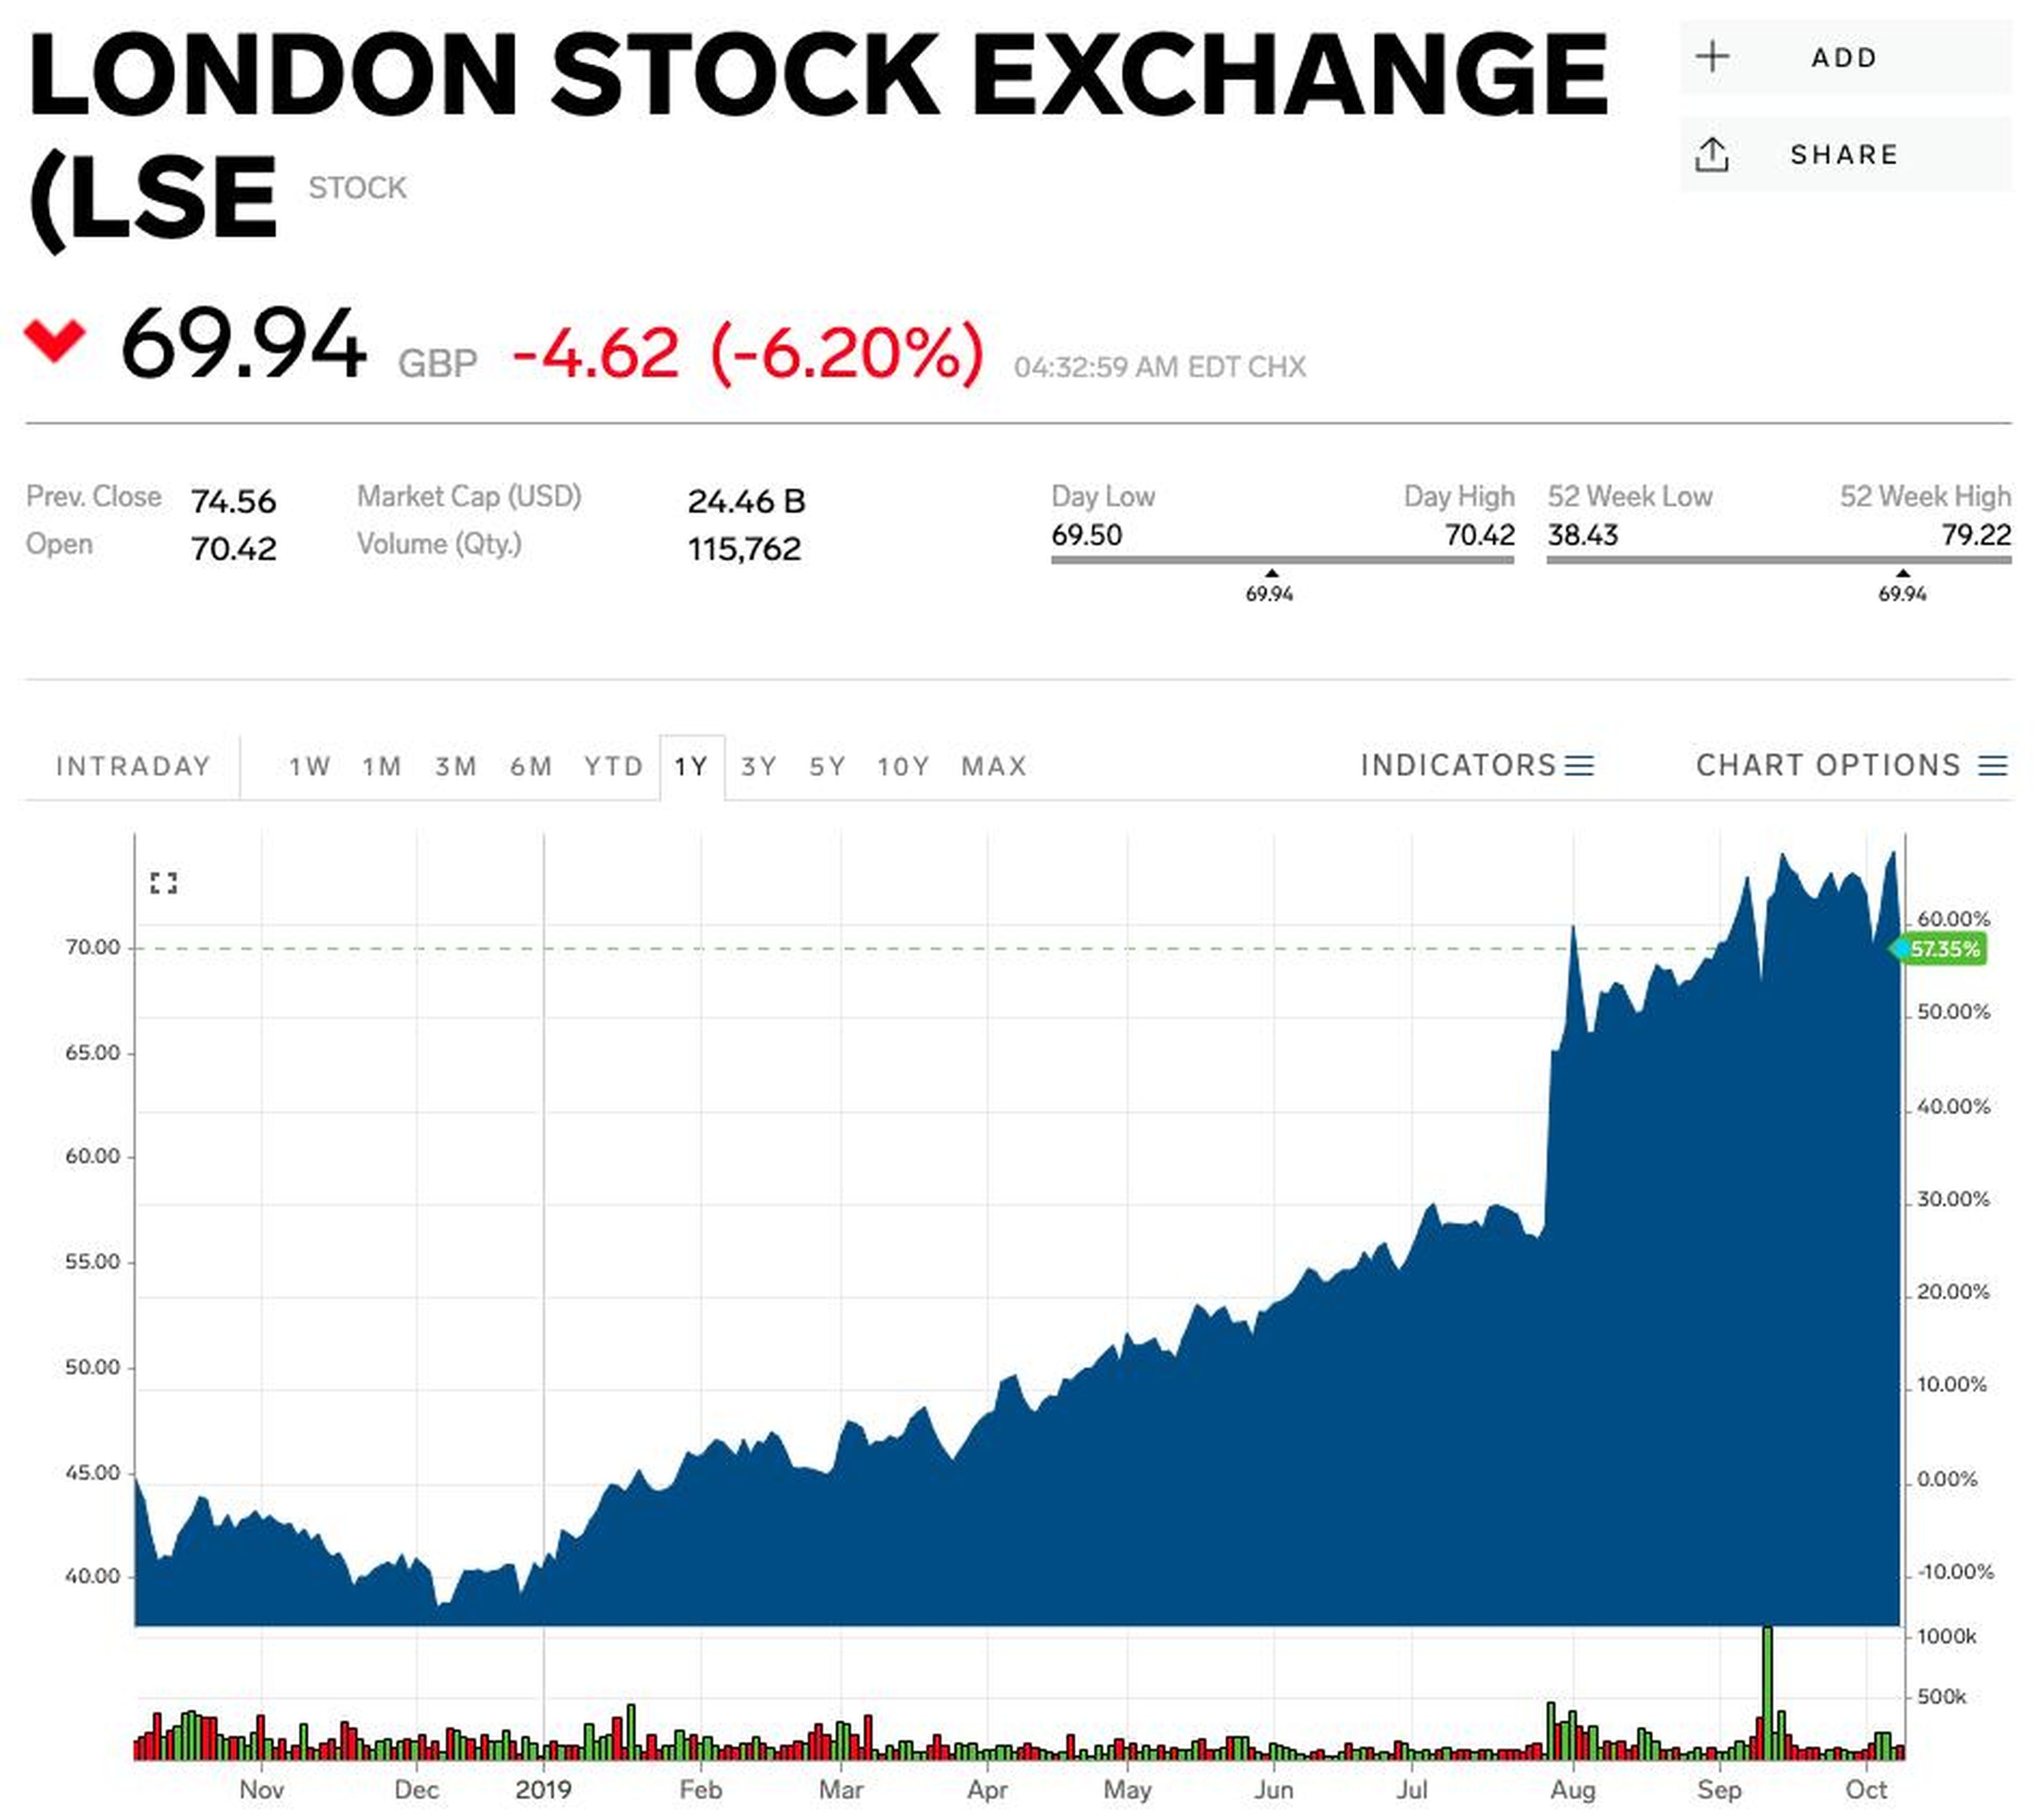 LSEG's share price has continued to rise since the start of the year